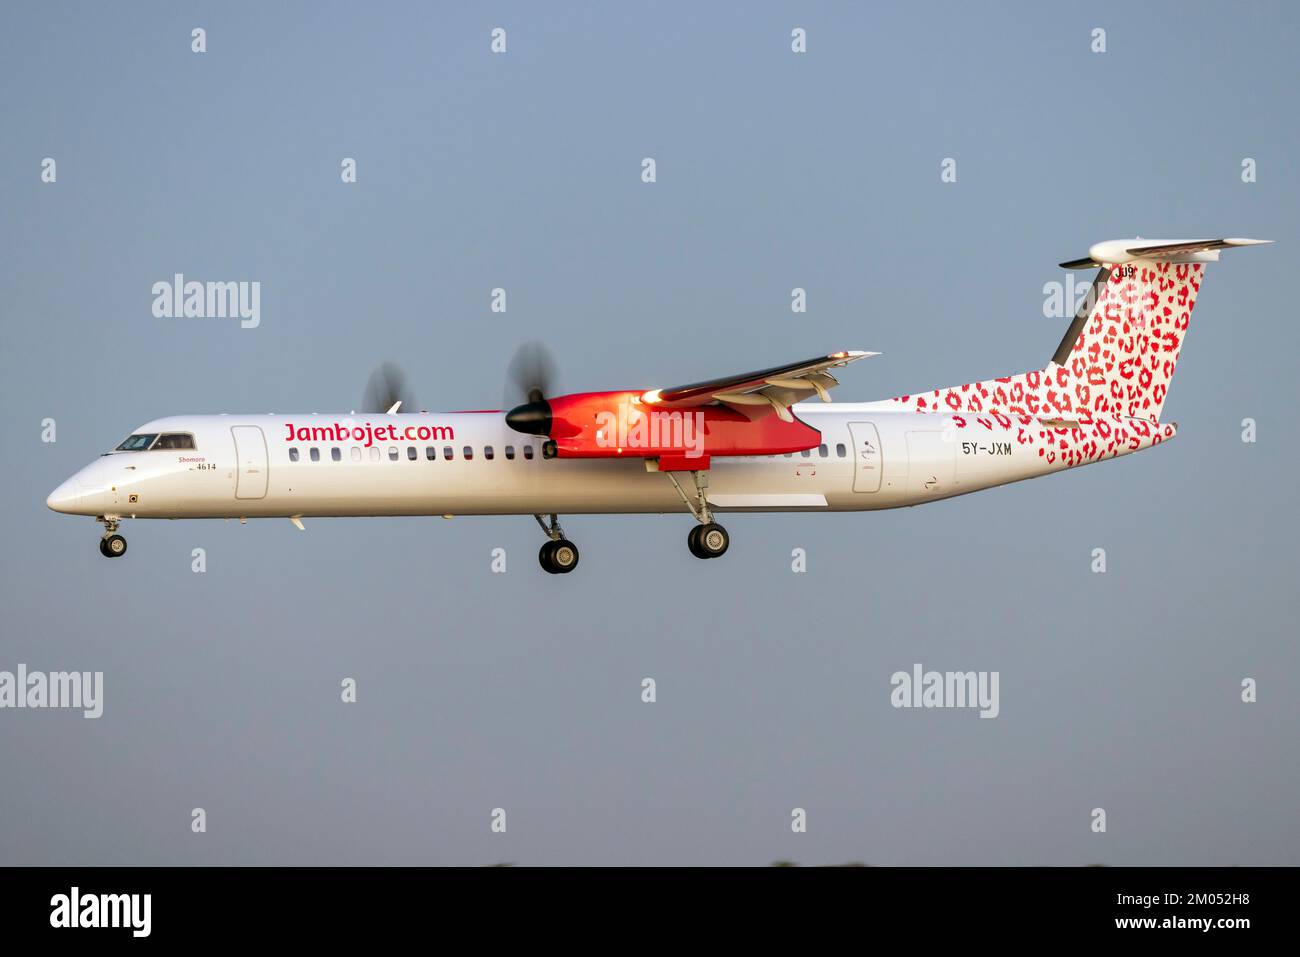 Jambojet De Havilland Canada DHC-8-402Q Dash 8 (REG: 5Y-JXM) on finals well after sunset on delivery flight. Stock Photo